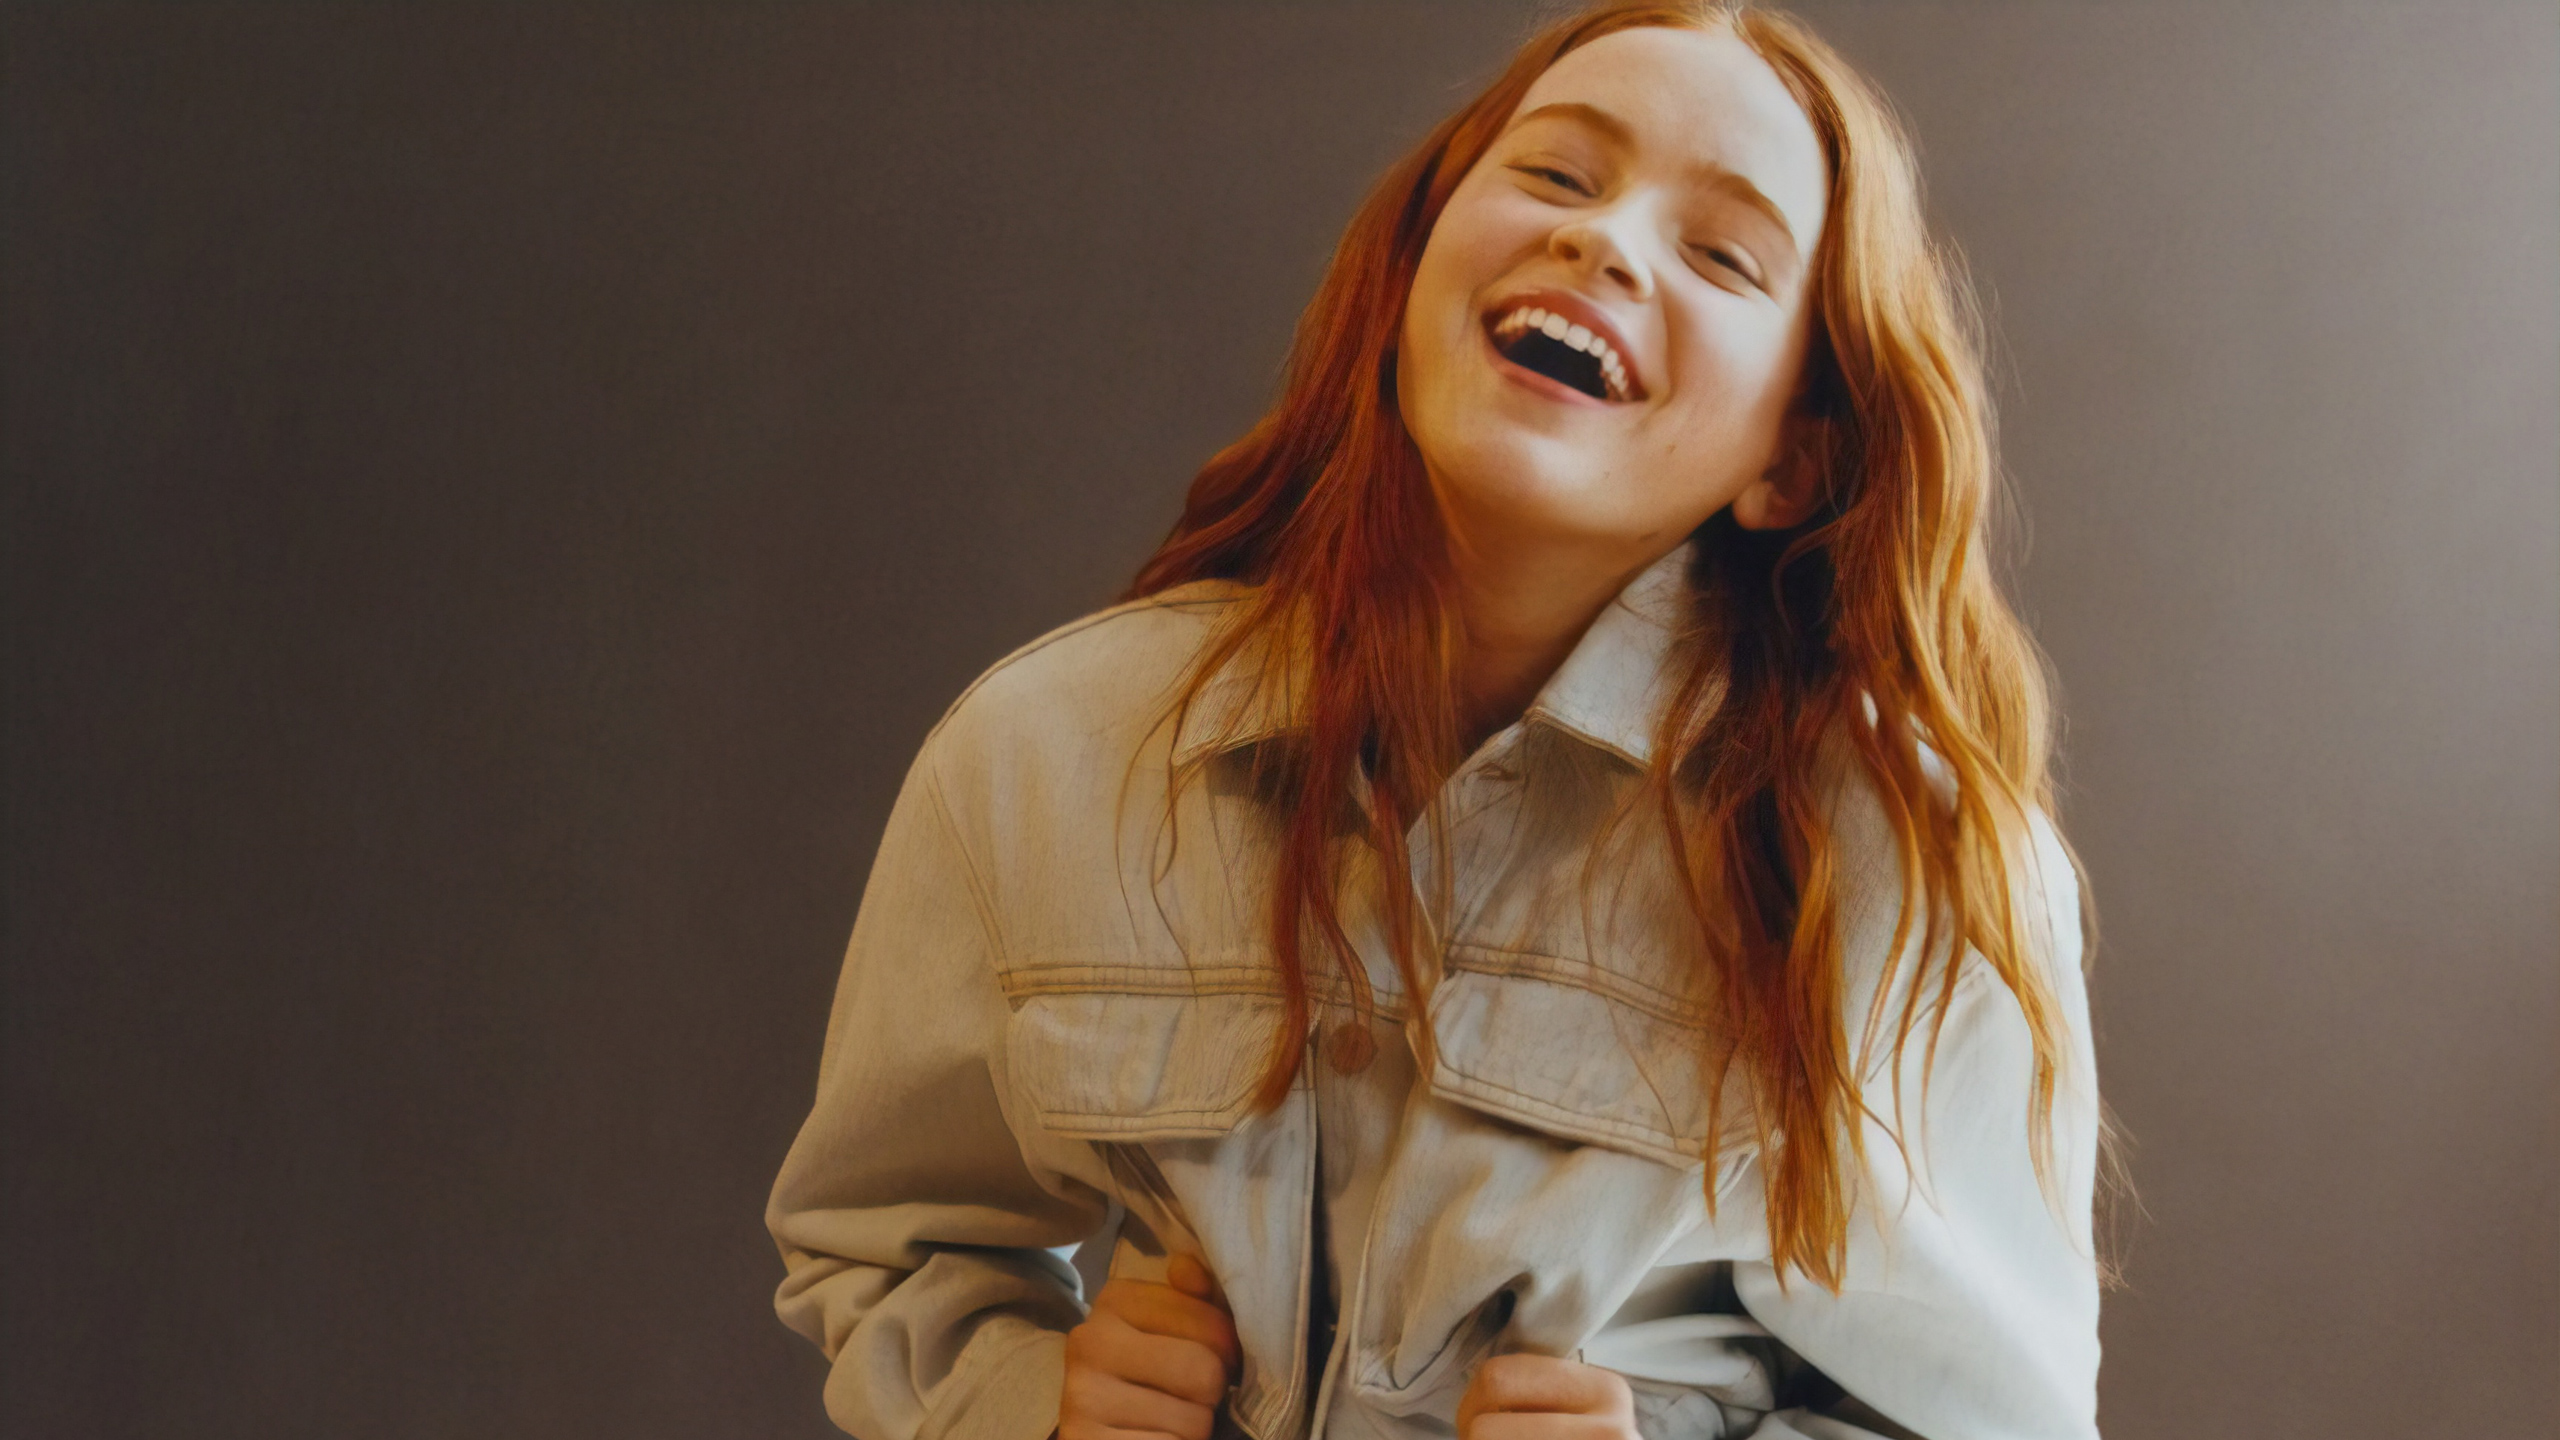 Sadie Sink Pull And Bear Photohoot HD Celebrities, 4k Wallpaper, Image, Background, Photo and Picture